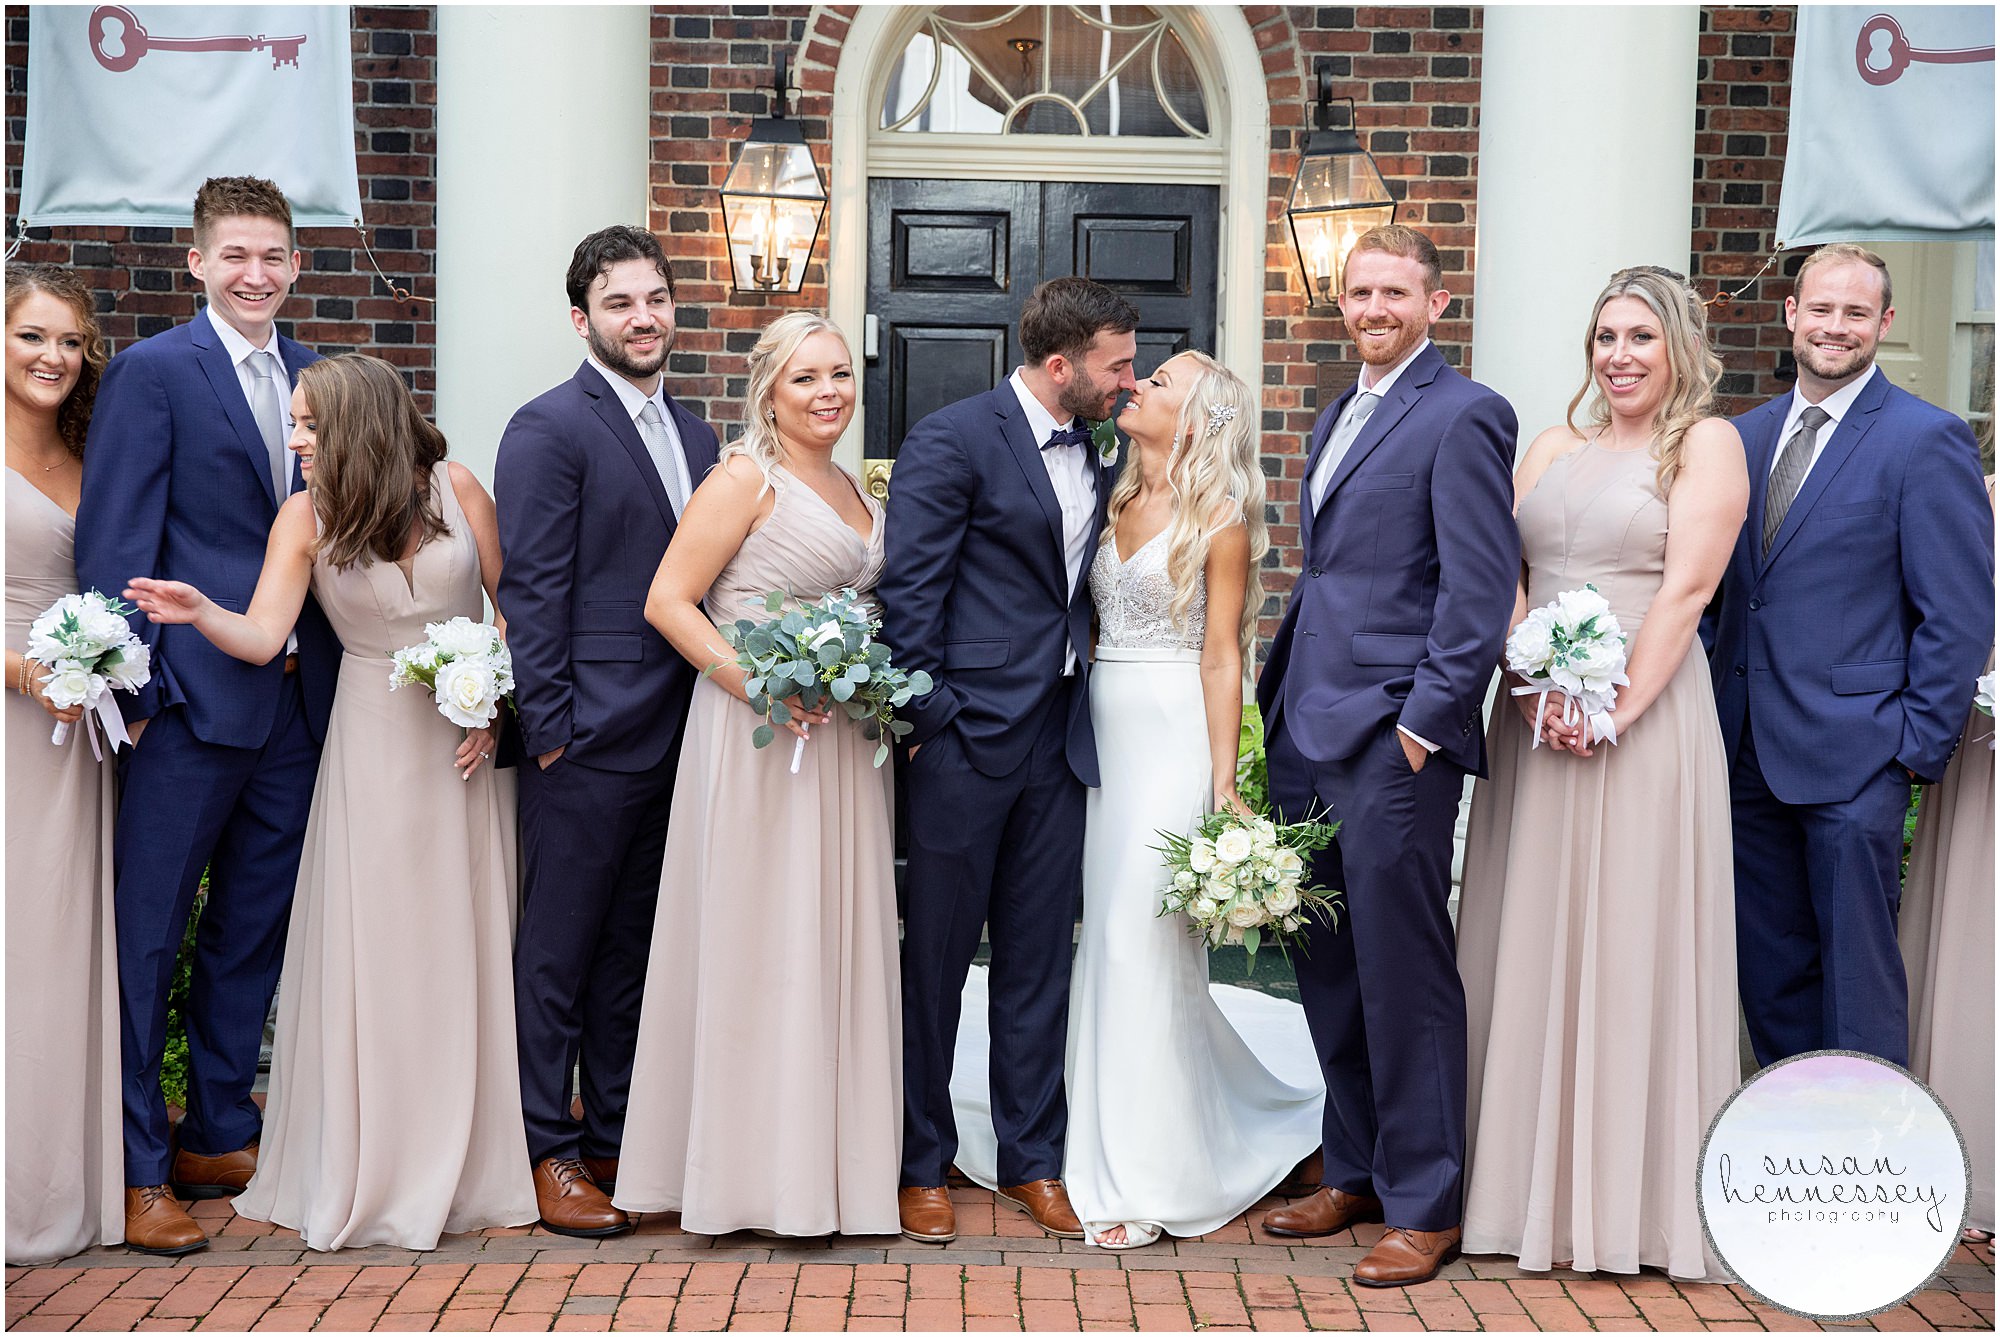 Bridal party portraits at Philadelphia microwedding at the Morris House Hotel